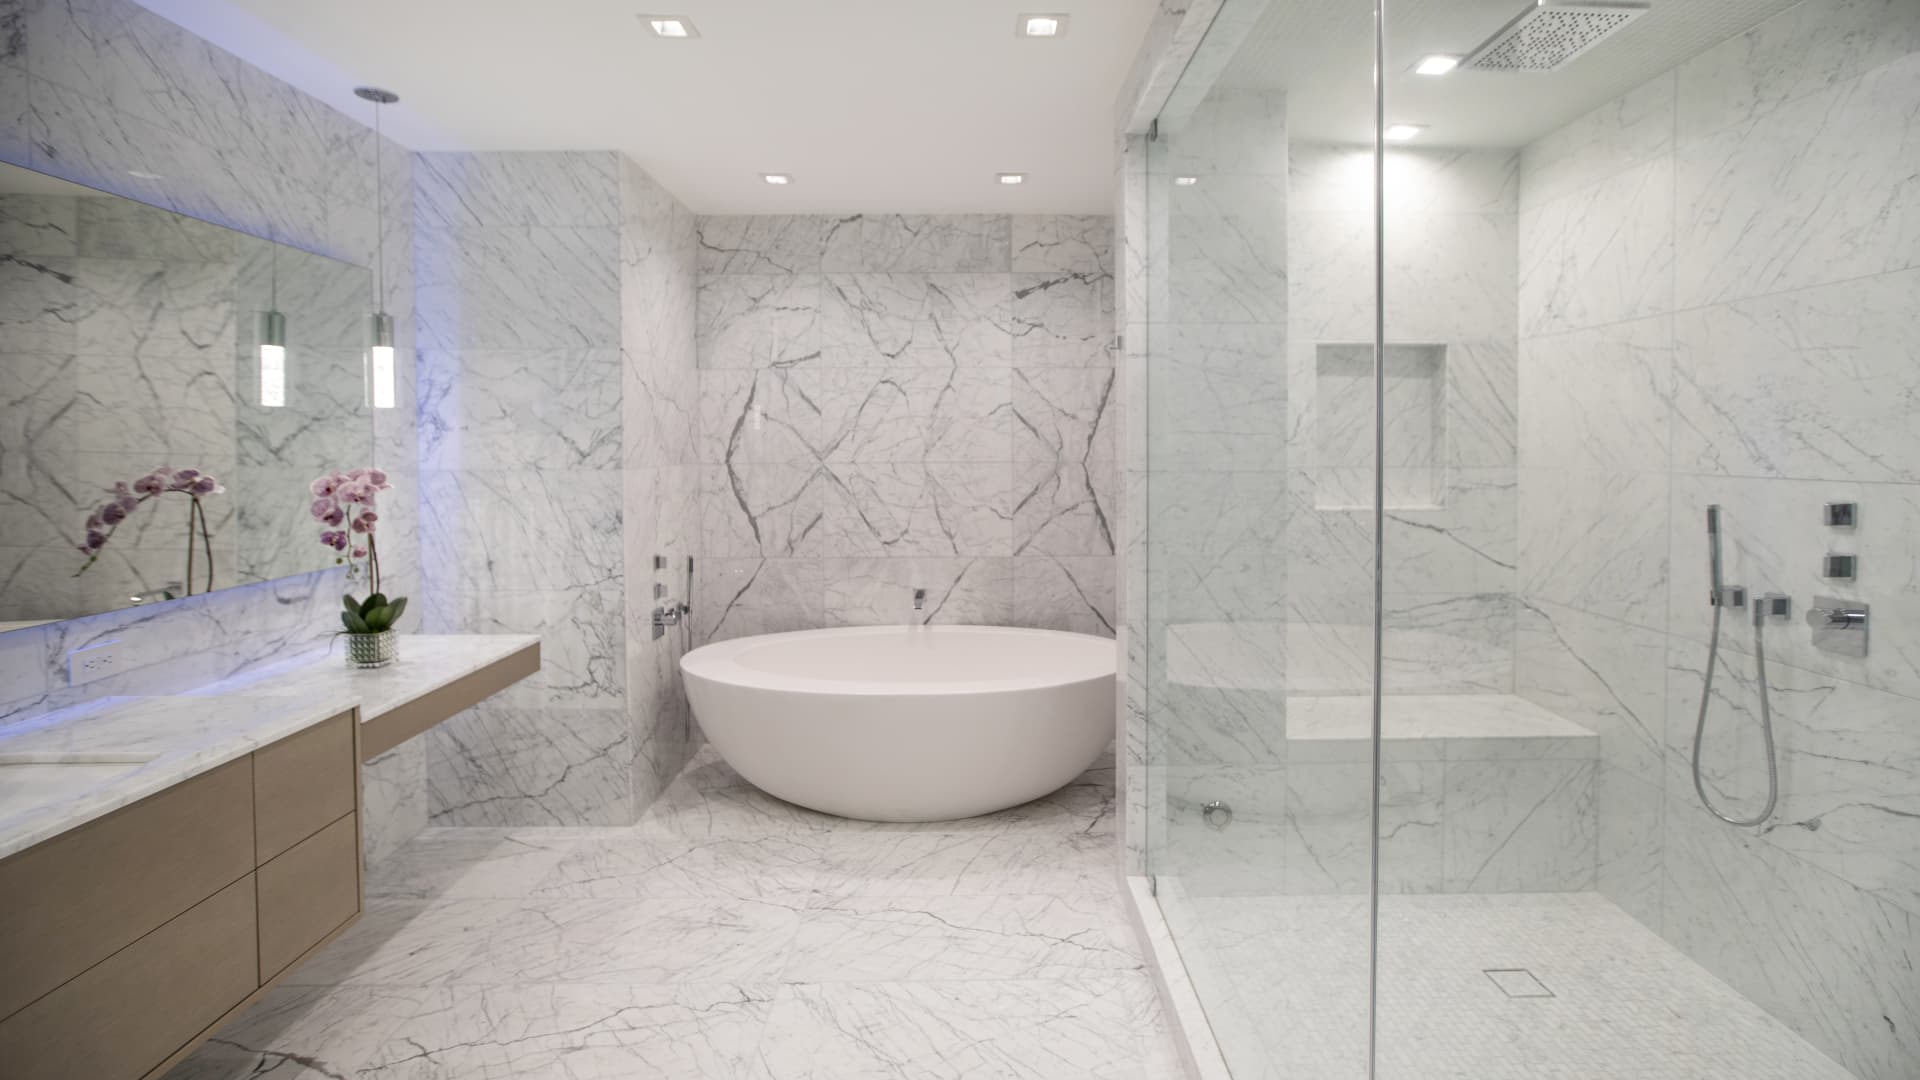 The marble-clad primary bath and steam shower.